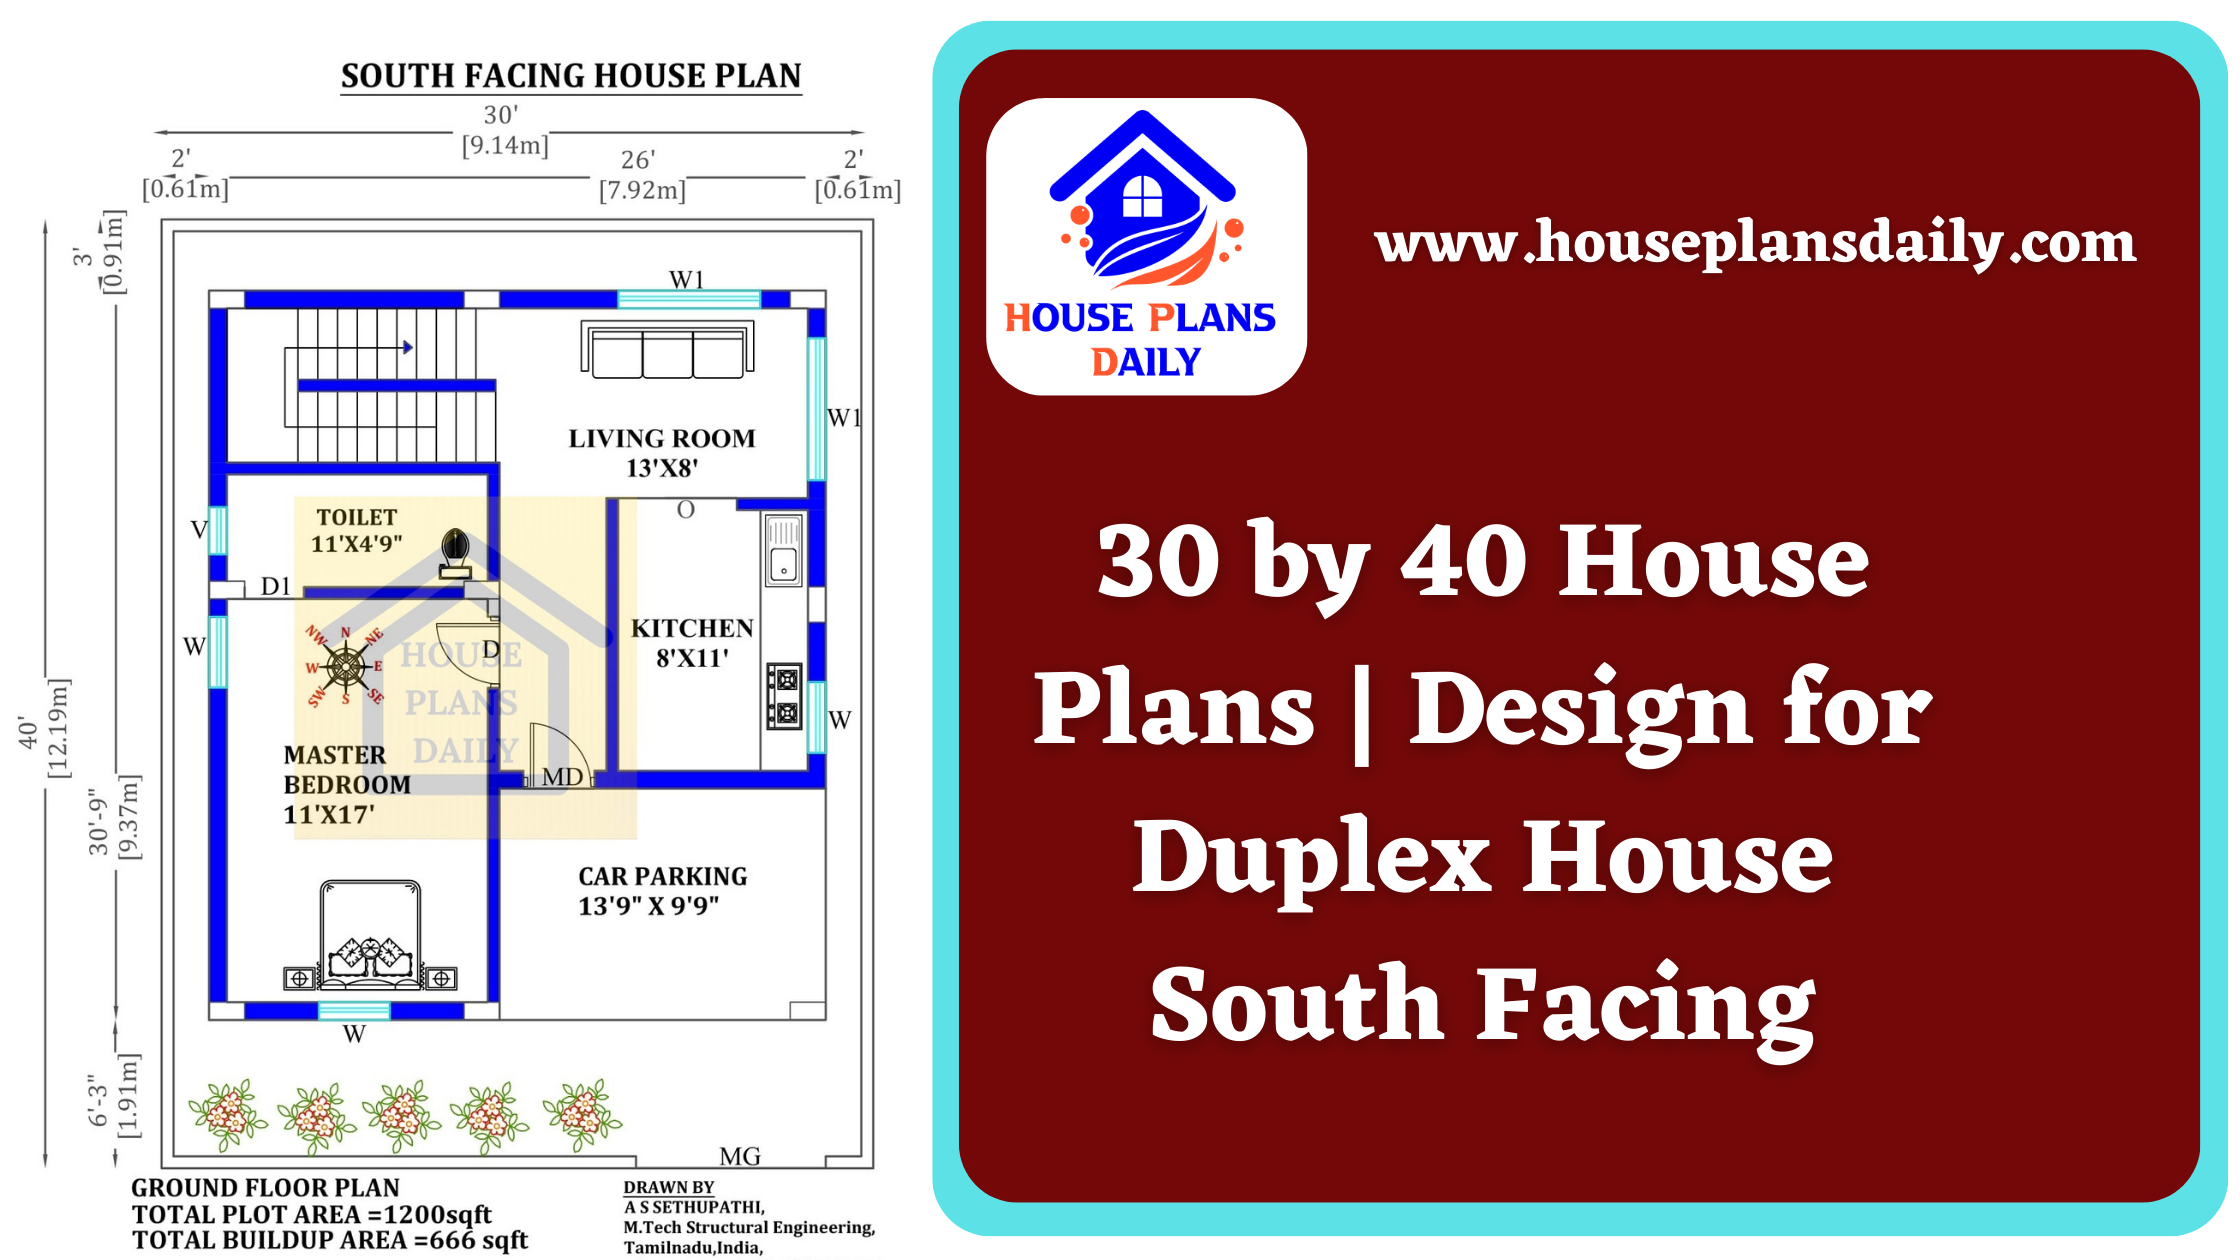 30 by 40 House Plans | Design for Duplex House South Facing